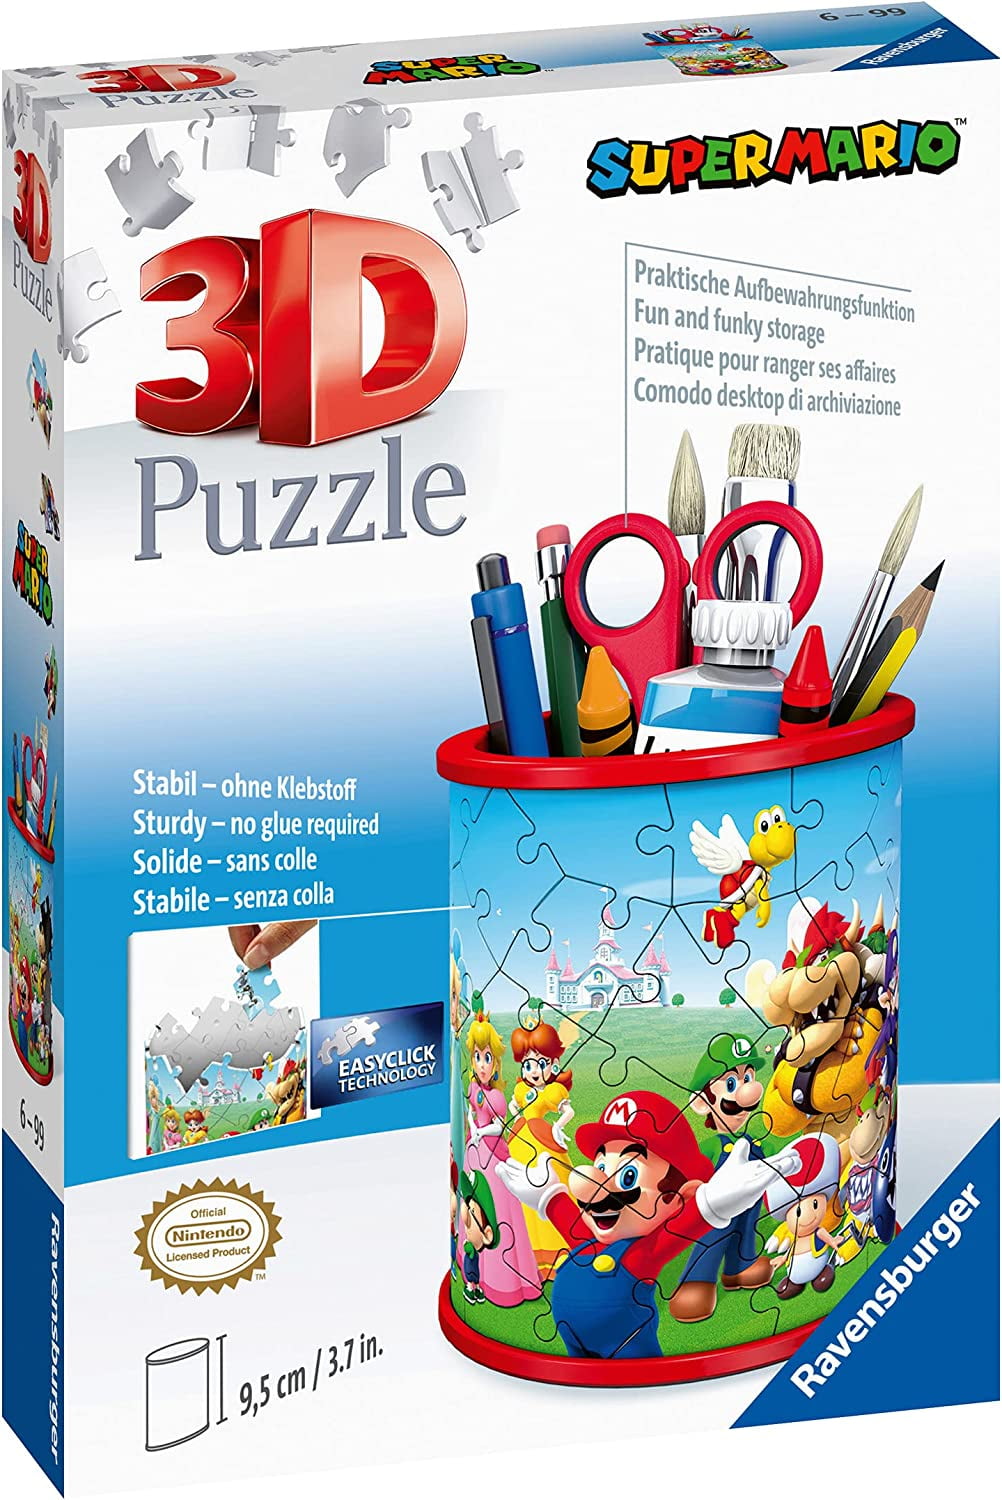 Ravensburger Super Mario Brothers Pencil Pot 3D Jigsaw Puzzles for Kids Age  6 Years Up - 54 Pieces - No Glue Required